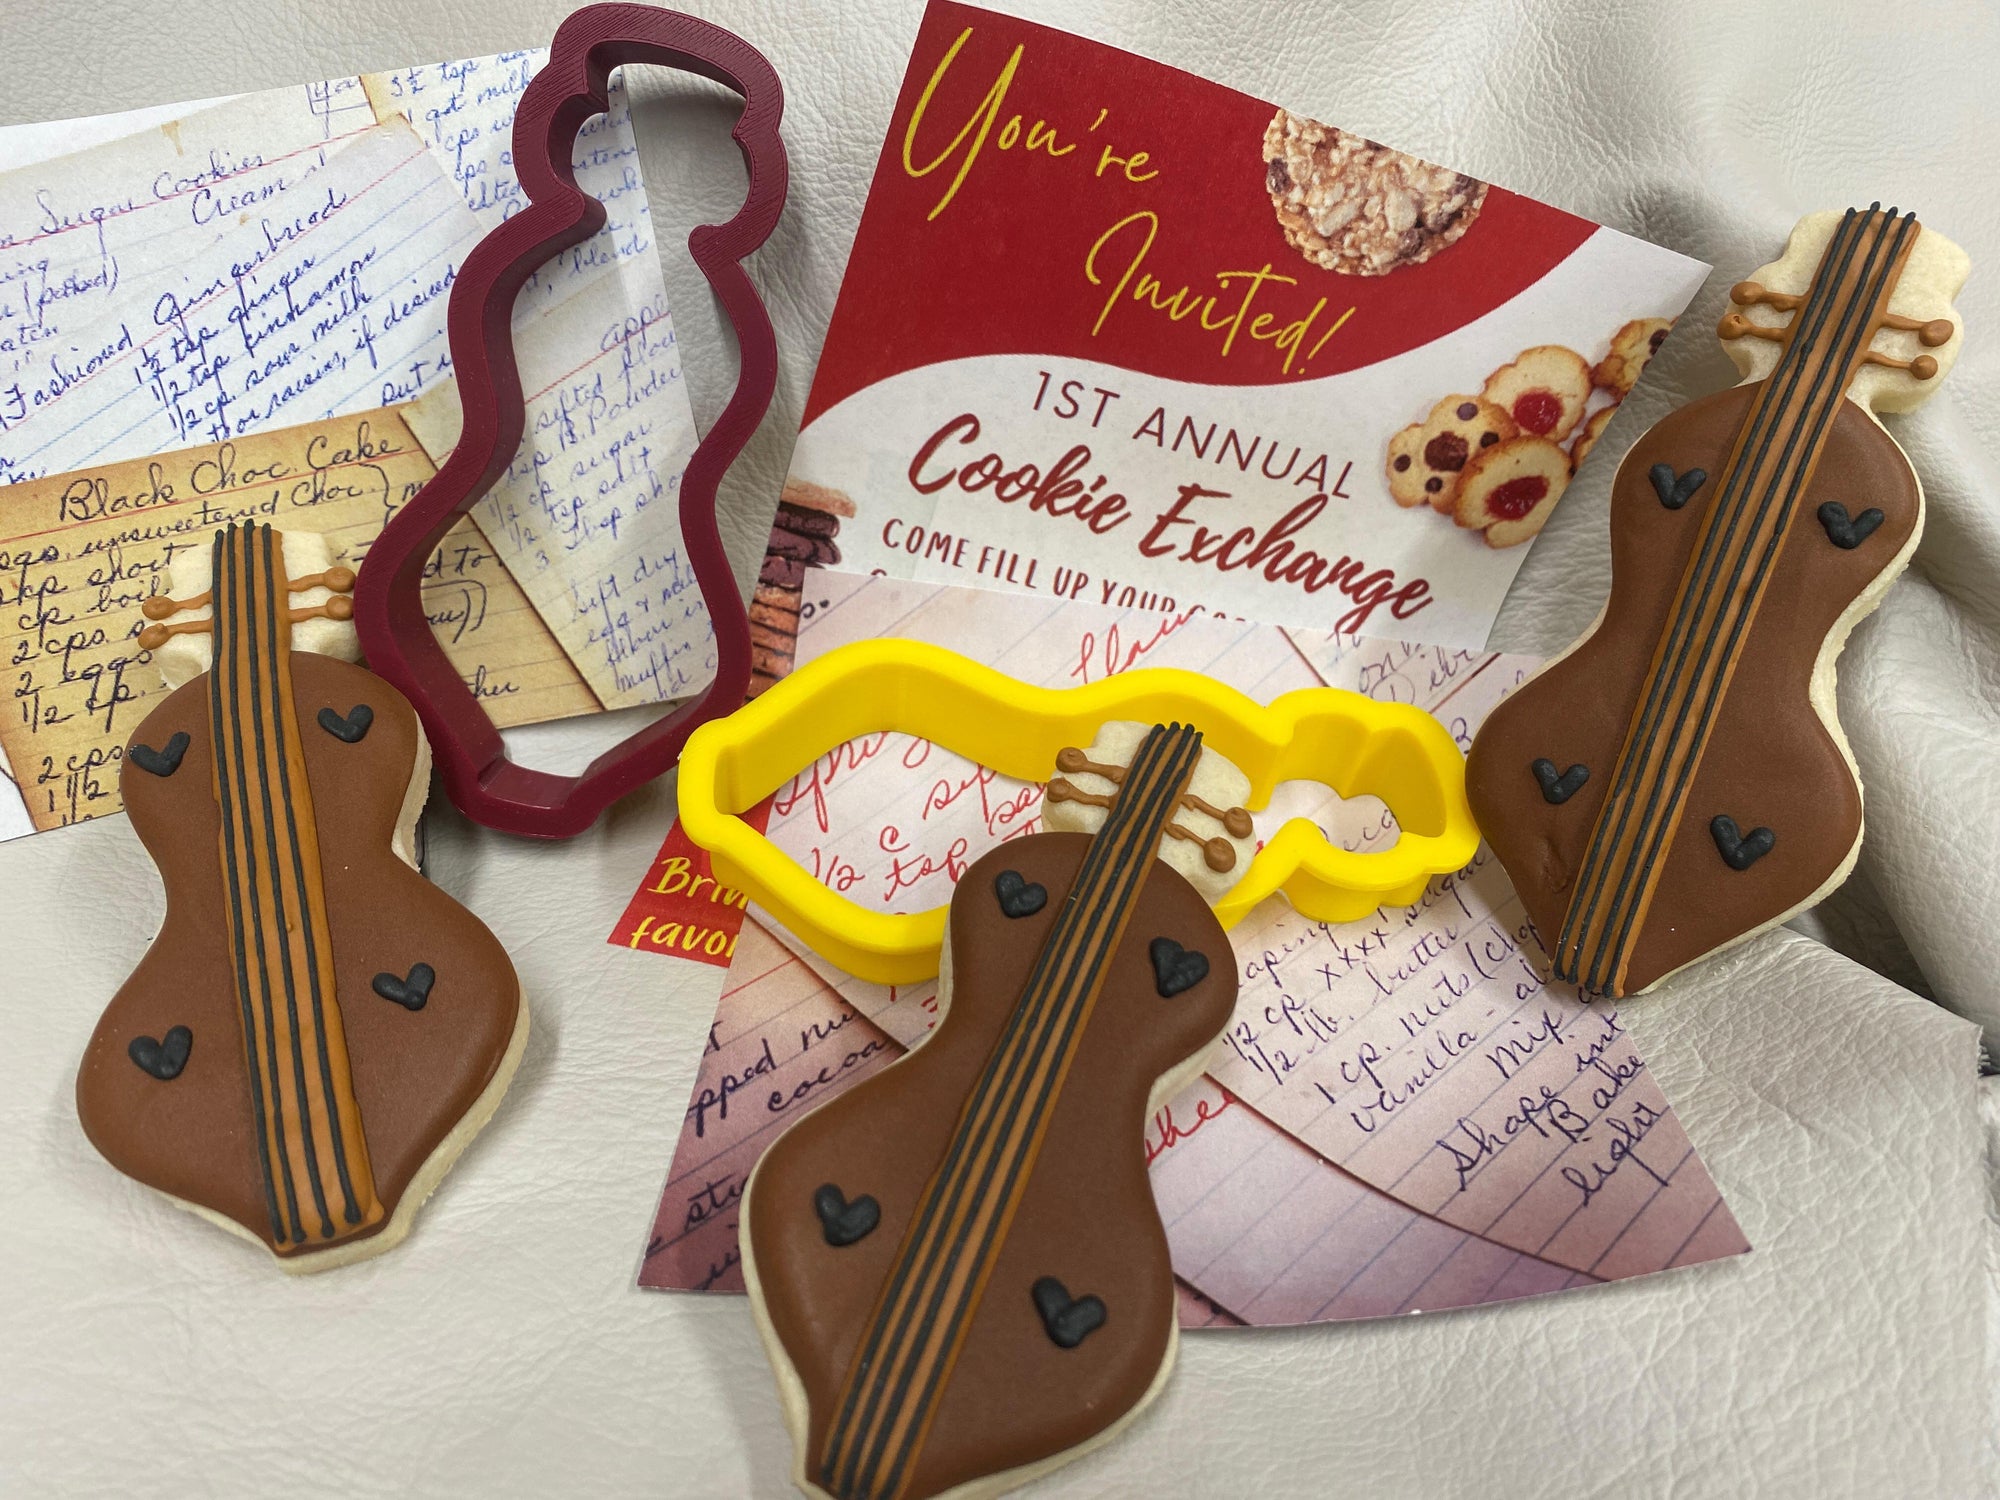 Join us for a unique Dulcimer Cookie Exchange! Show off your baking skills with our cookie cutter shaped like a dulcimer. Don't worry if you're not familiar with